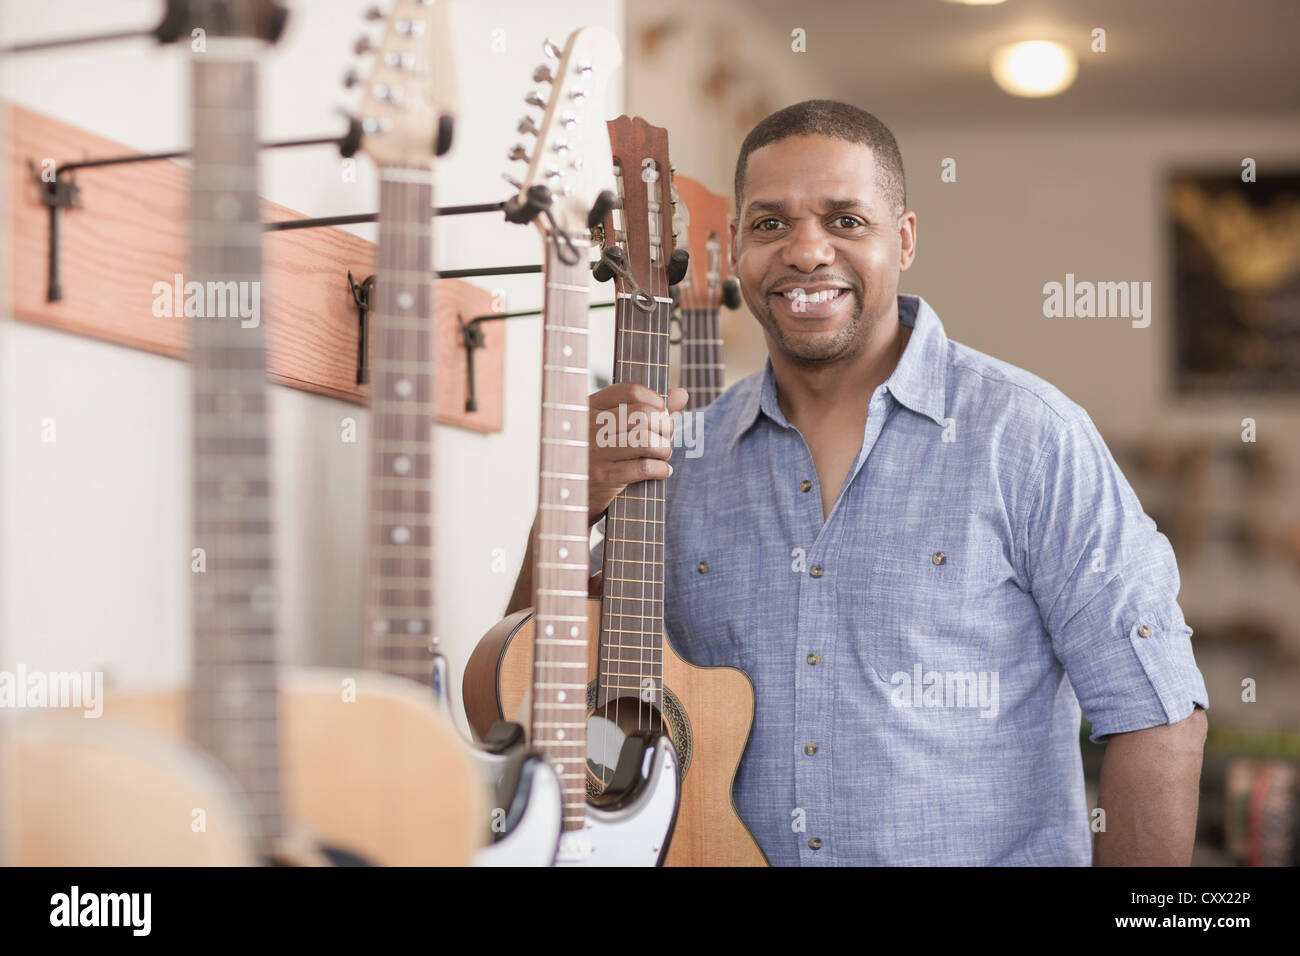 Native American man holding guitar in music store Stock Photo